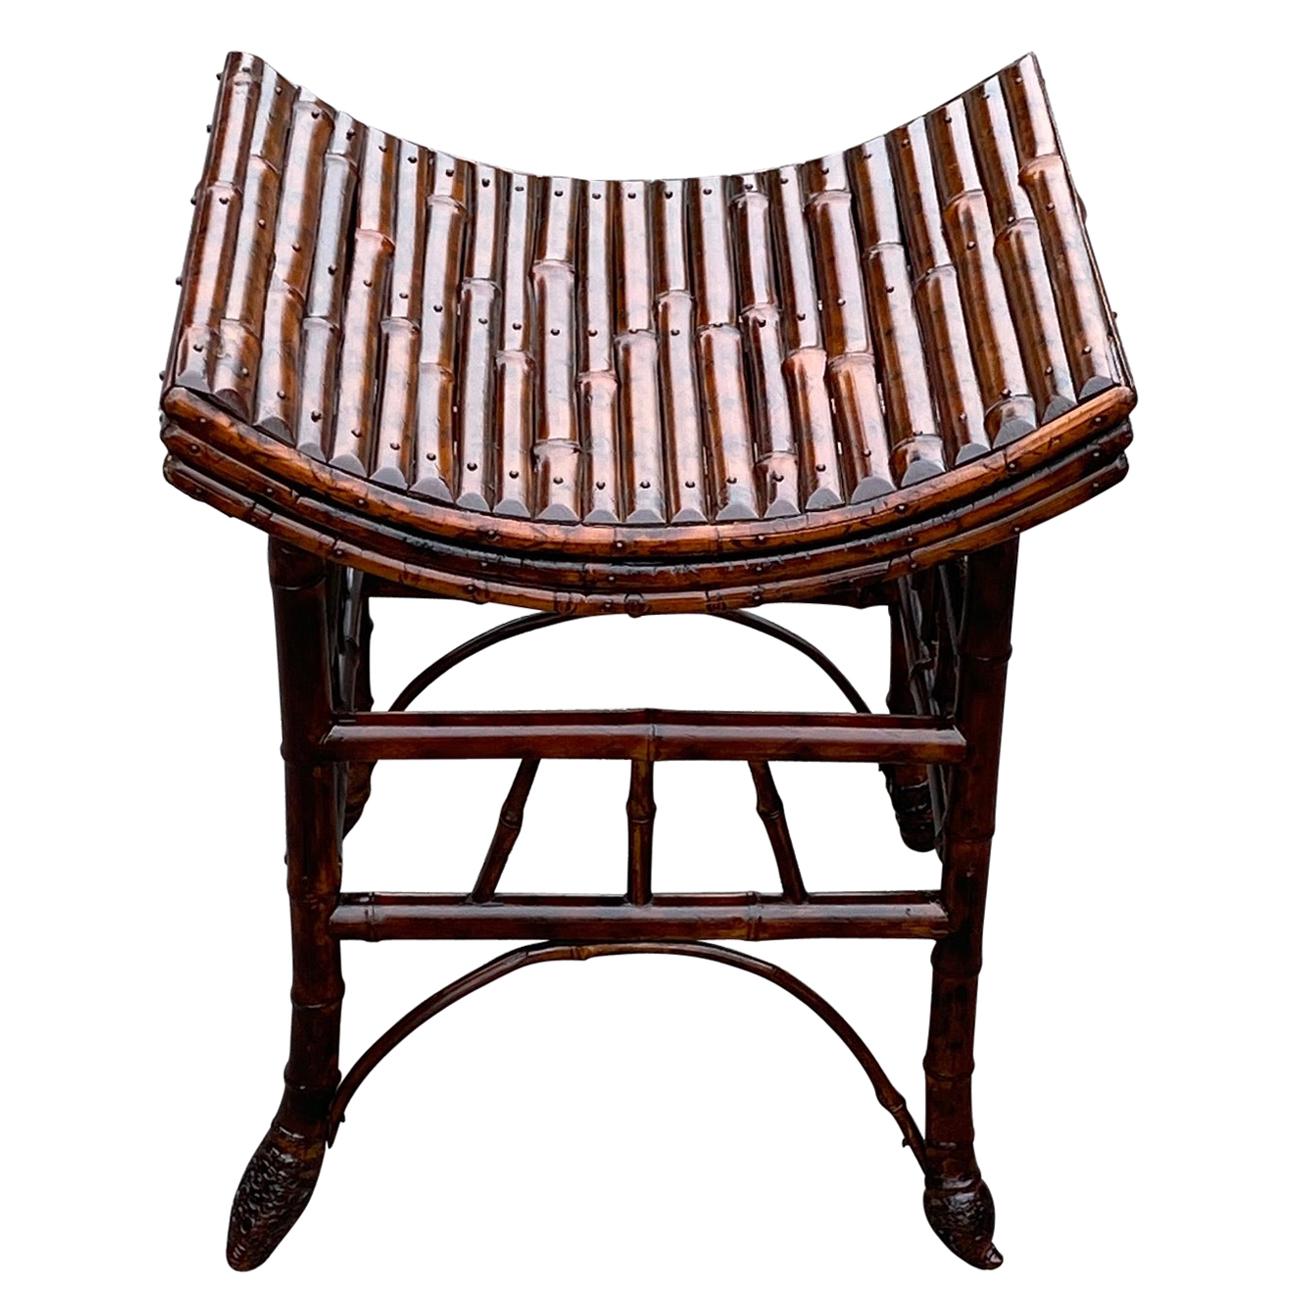 Handsome English Bamboo Bench or Stool with Faux Tortoise Finish